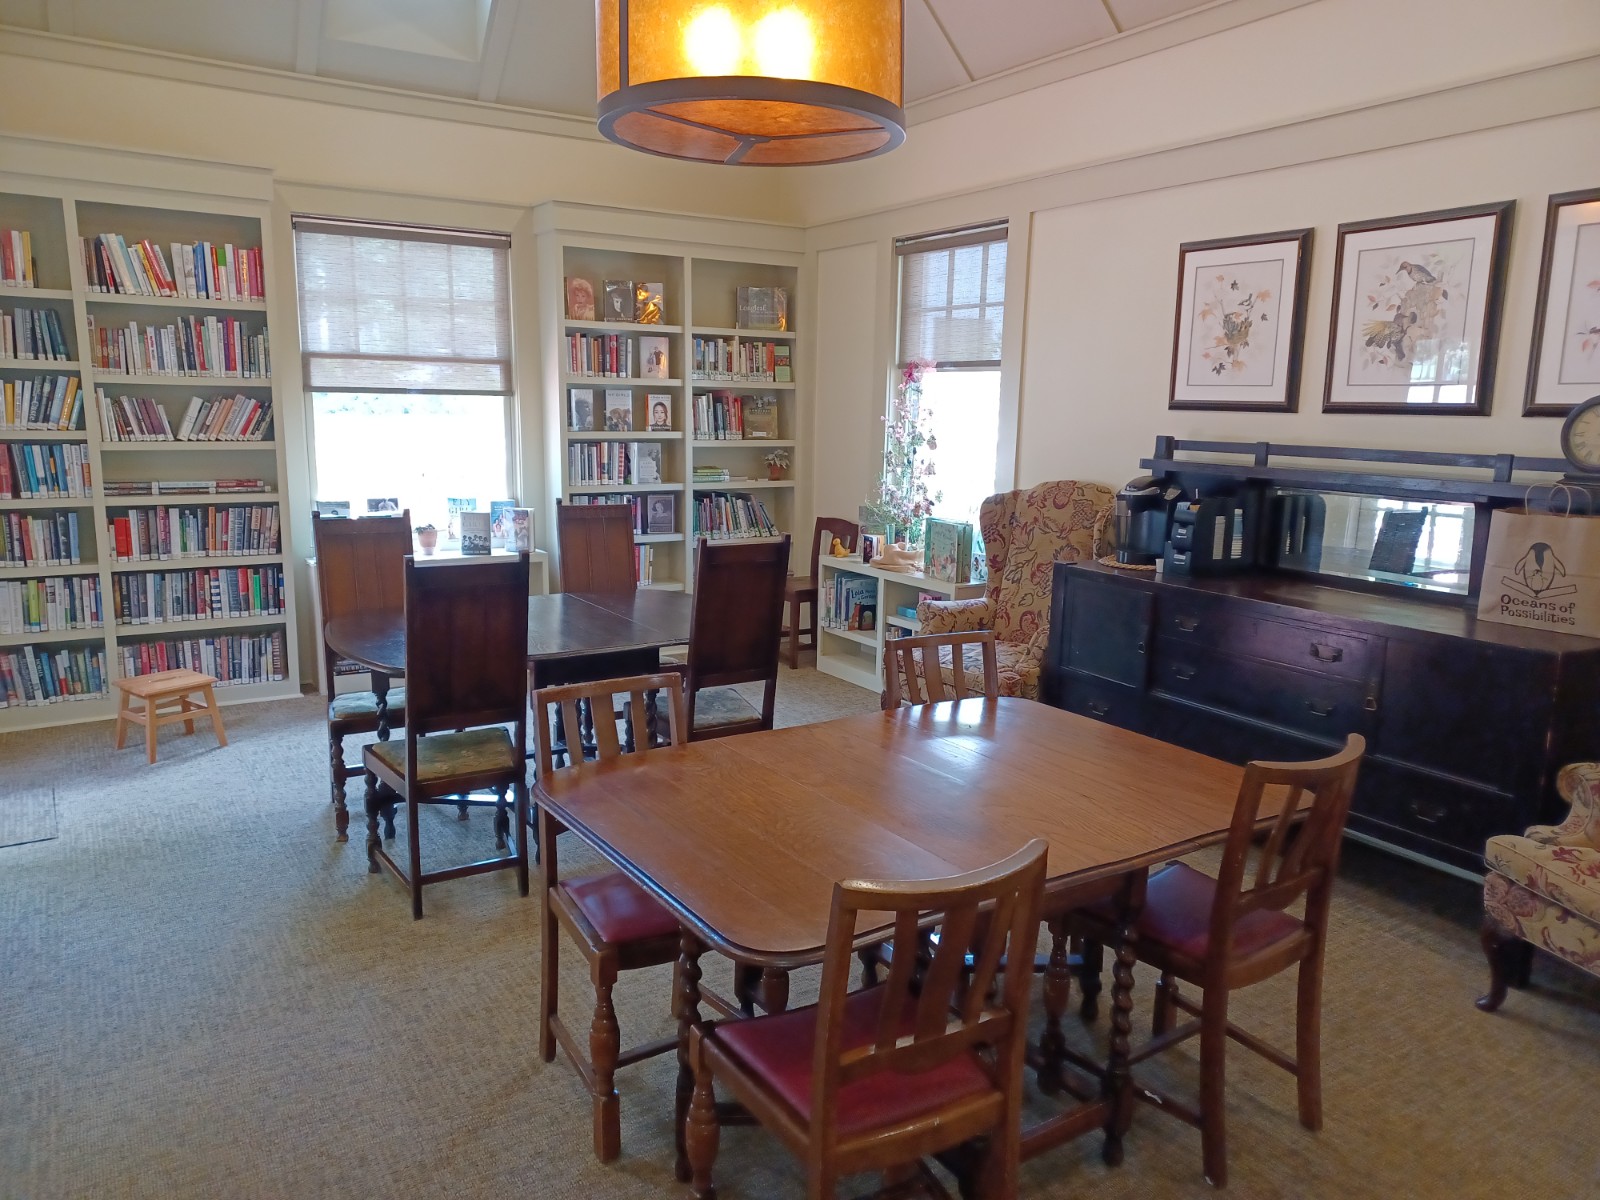 Mt Laurel community room showing tables and chairs